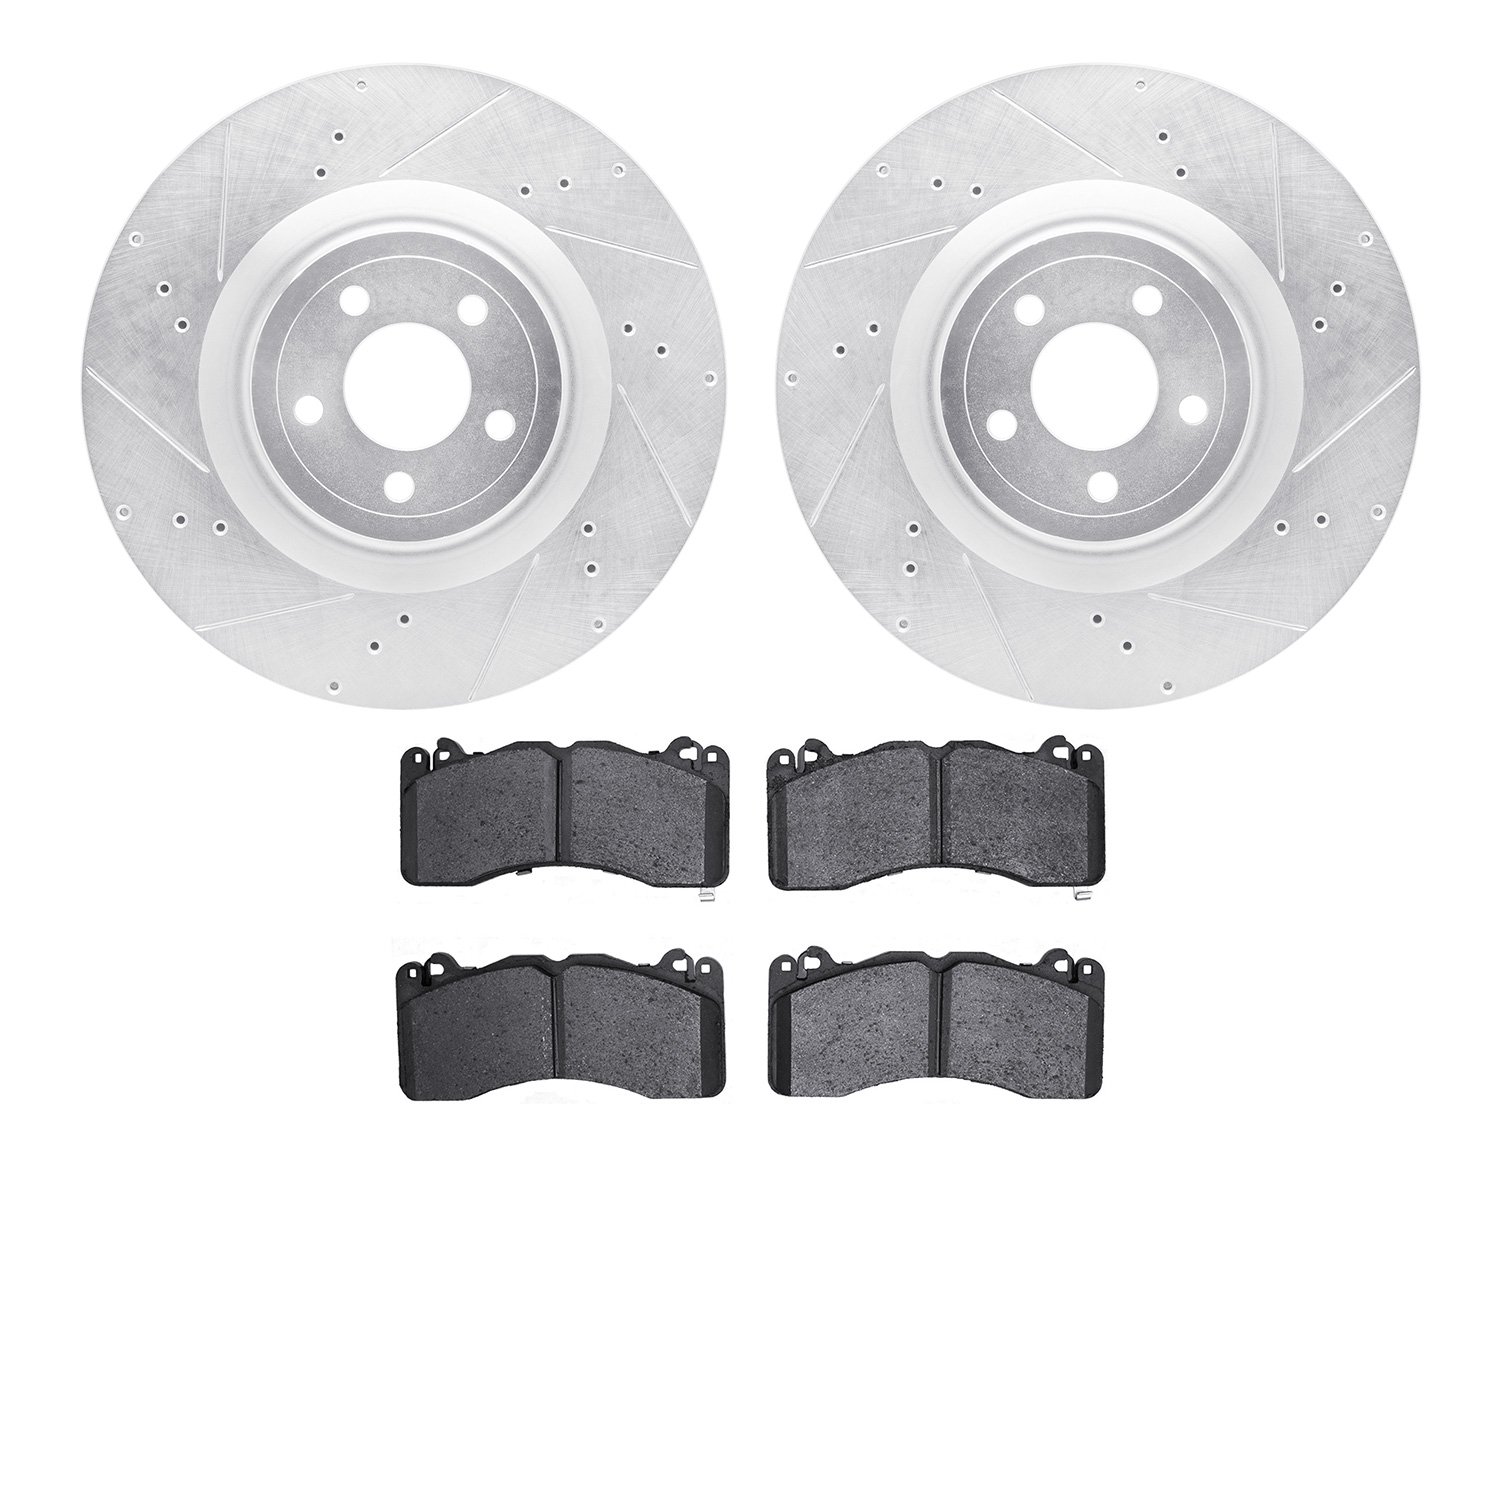 7502-99161 Drilled/Slotted Brake Rotors w/5000 Advanced Brake Pads Kit [Silver], Fits Select Ford/Lincoln/Mercury/Mazda, Positio